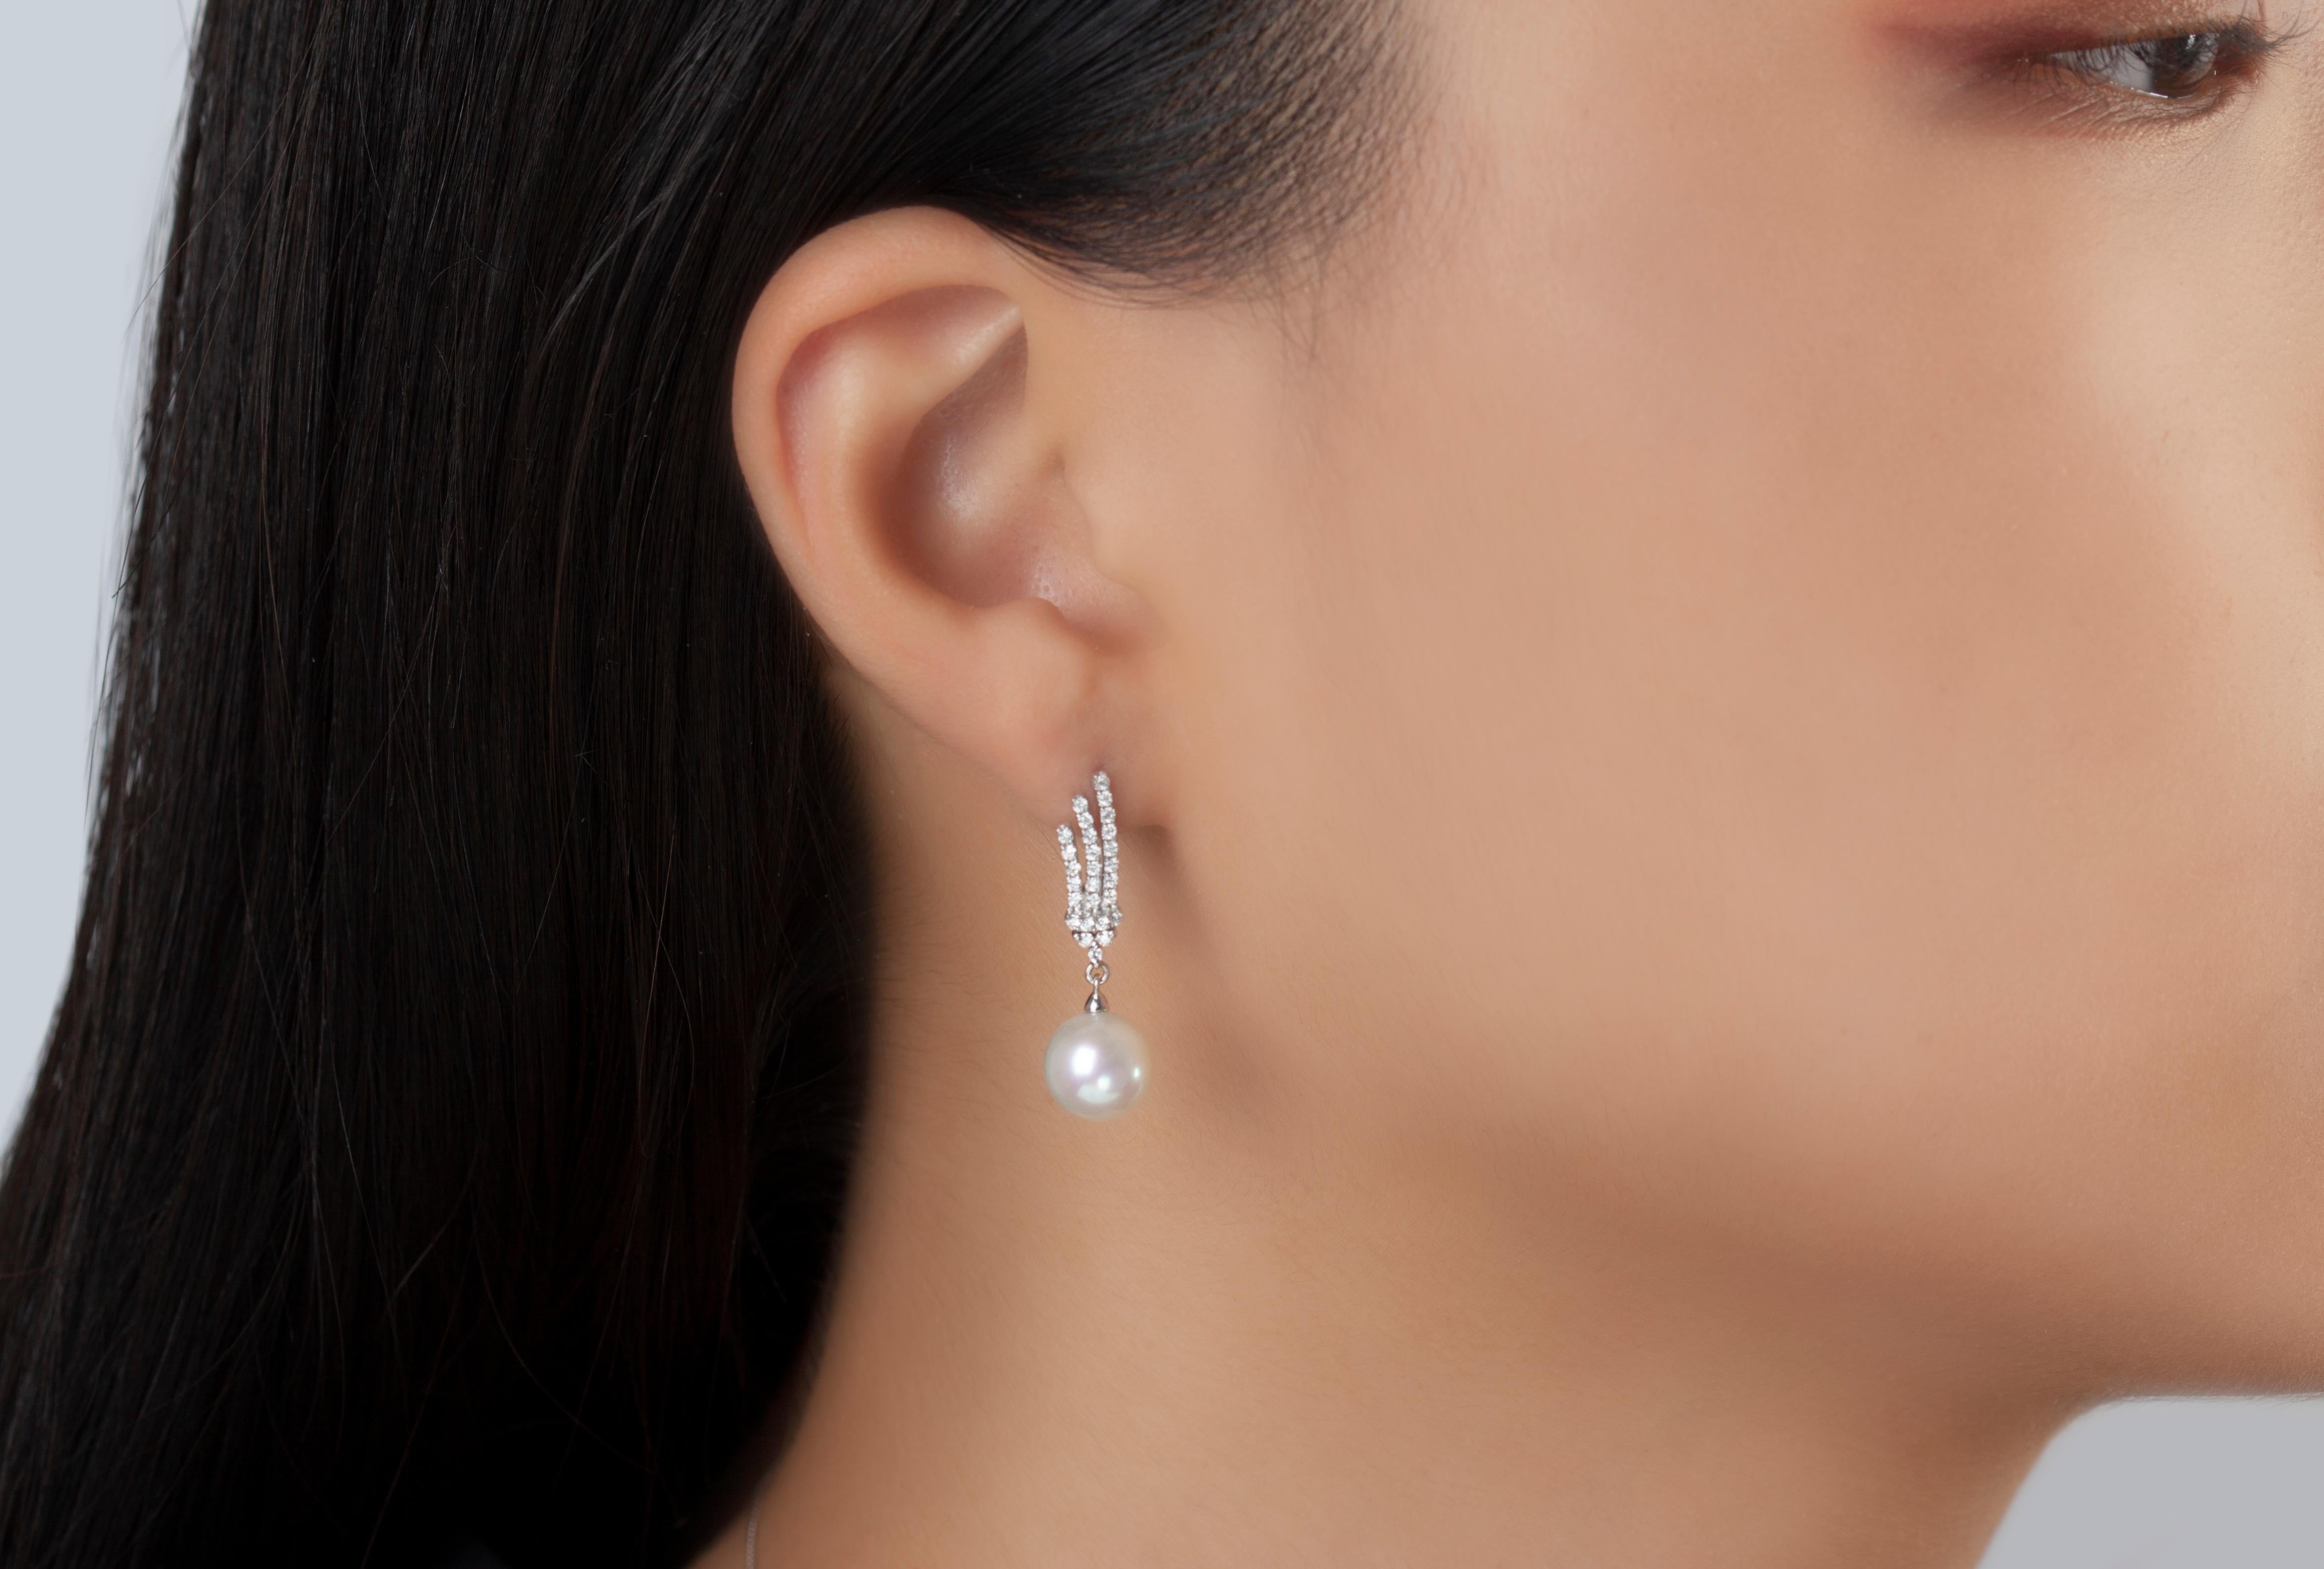 These elegant earrings by Yoko London feature lustrous 9-9.5mm Freshwater pearls beneath a striking arrangement of diamonds. Pair these intricate earrings with any evening look to add a touch of unparalleled elegance.  
-9-9.5mm Freshwater Pearls